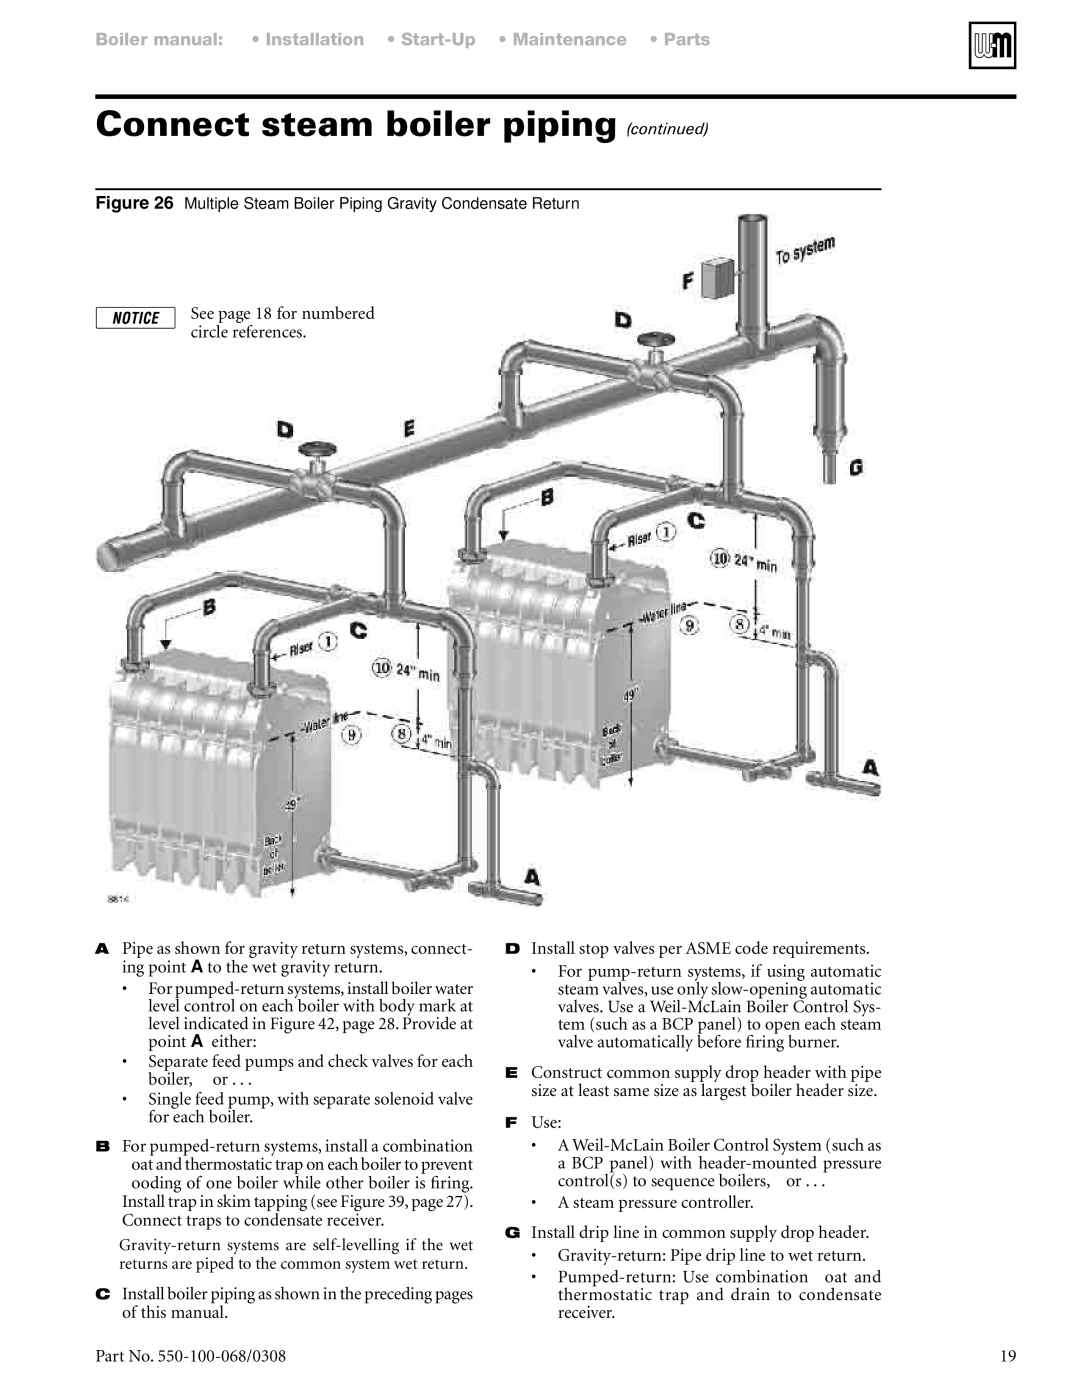 Weil-McLain 88 manual Connect steam boiler piping continued, See page 18 for numbered circle references 